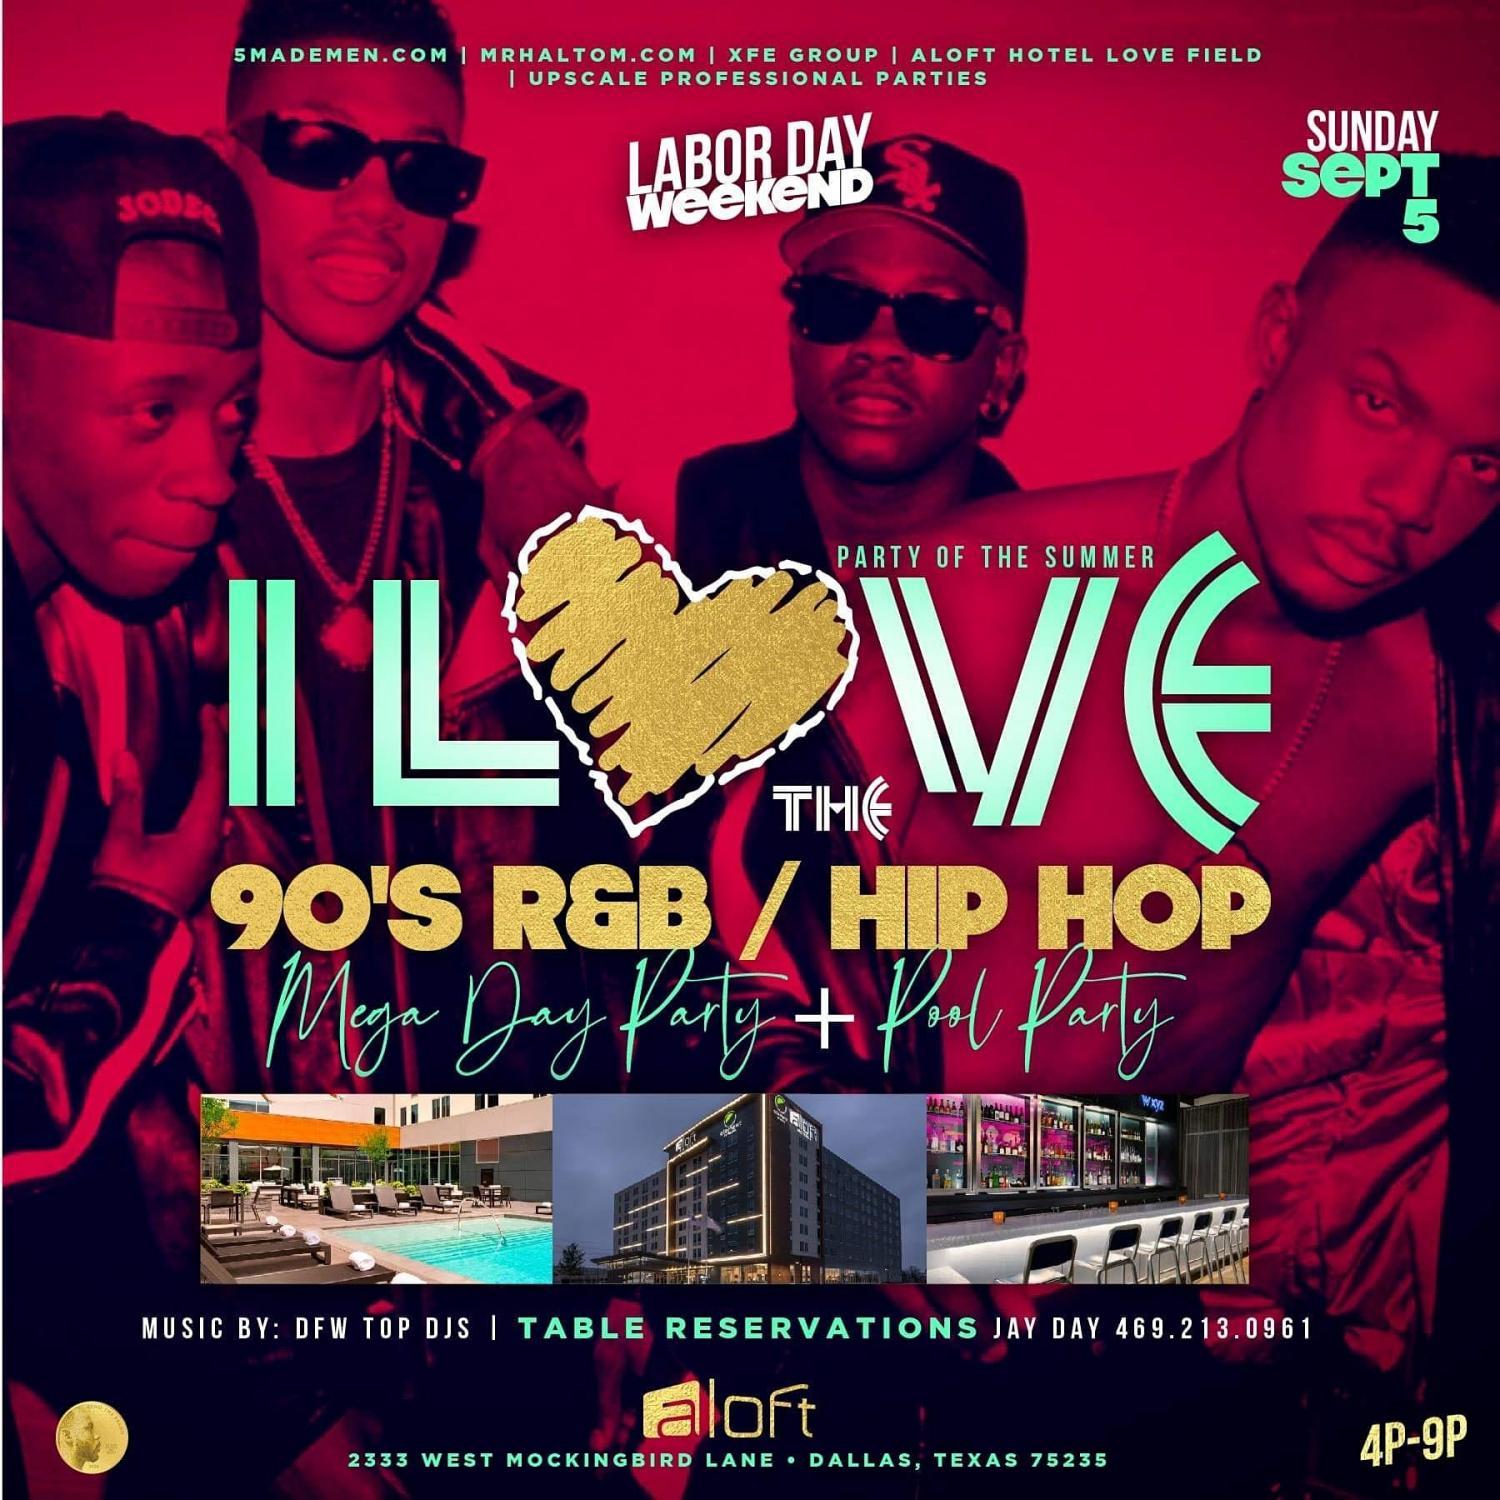 I Love the 90's R&B / Hip Hop {Mega Day Party/ Pool Party} Memorial Weekend